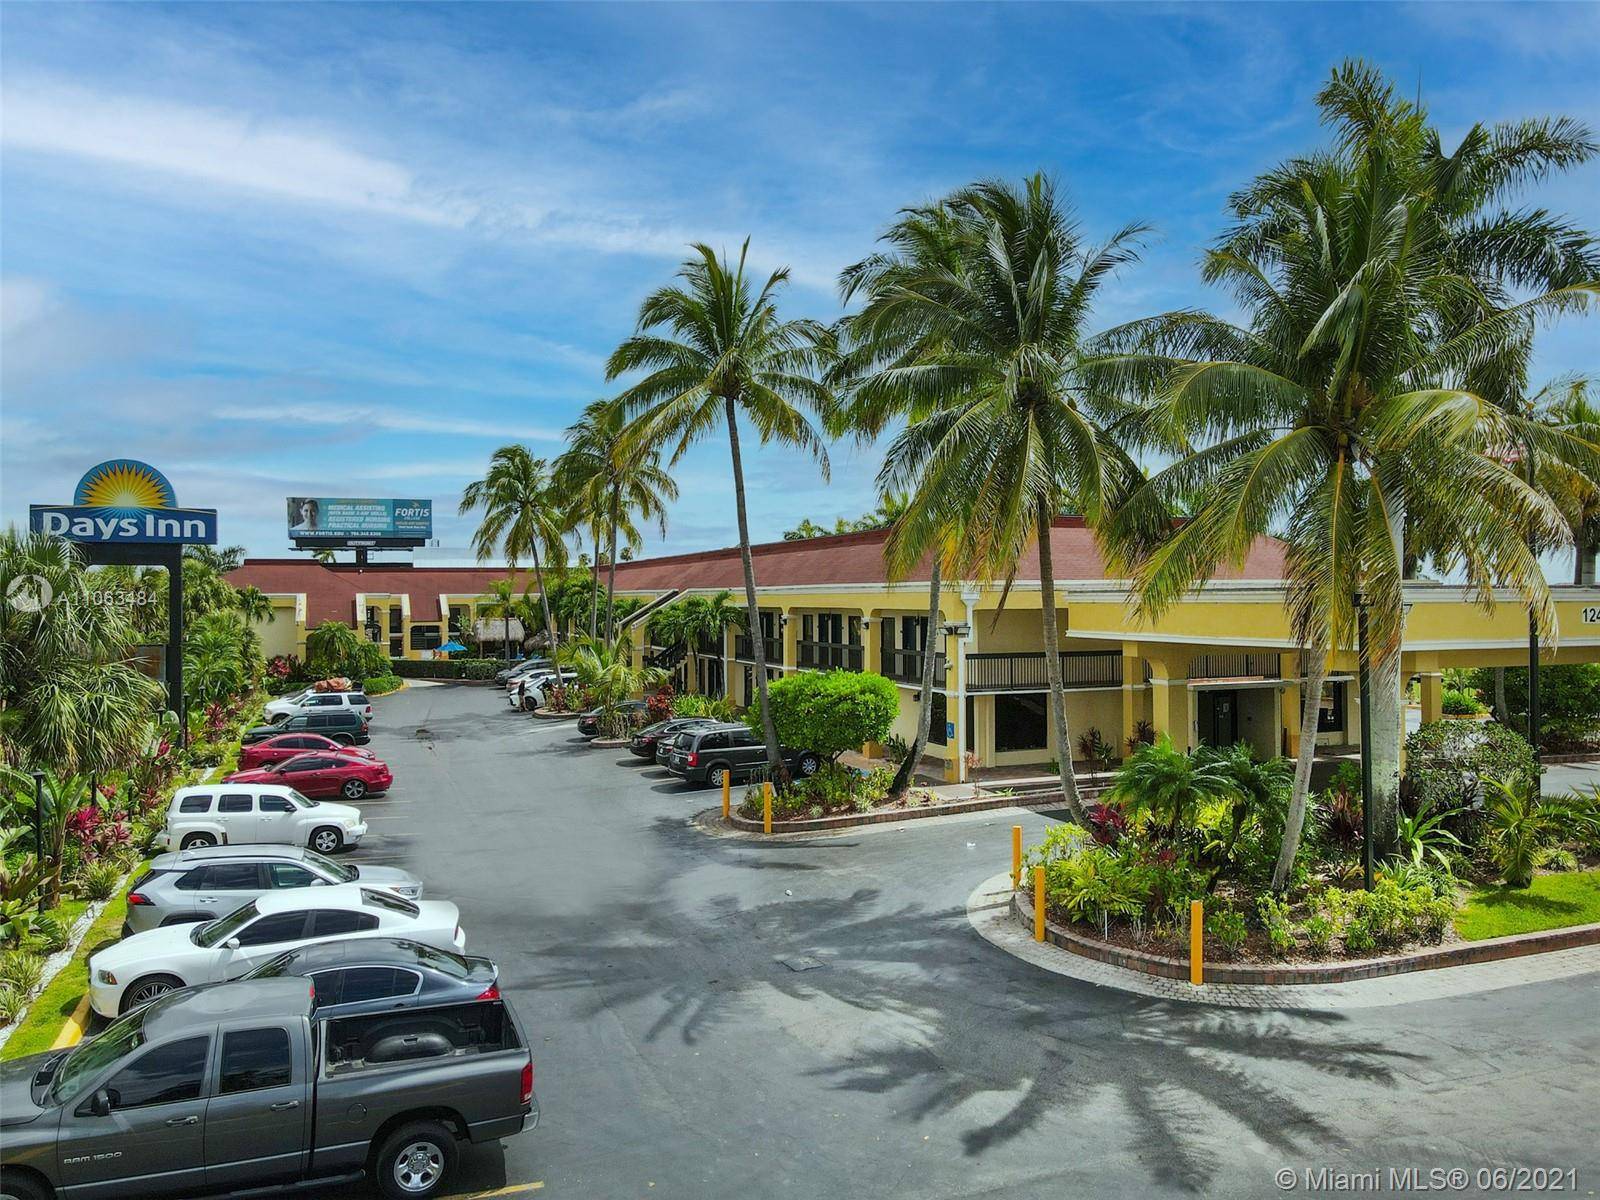 Bravo and Partners Realty is pleased to present this Days Inn by Wyndham Florida City.